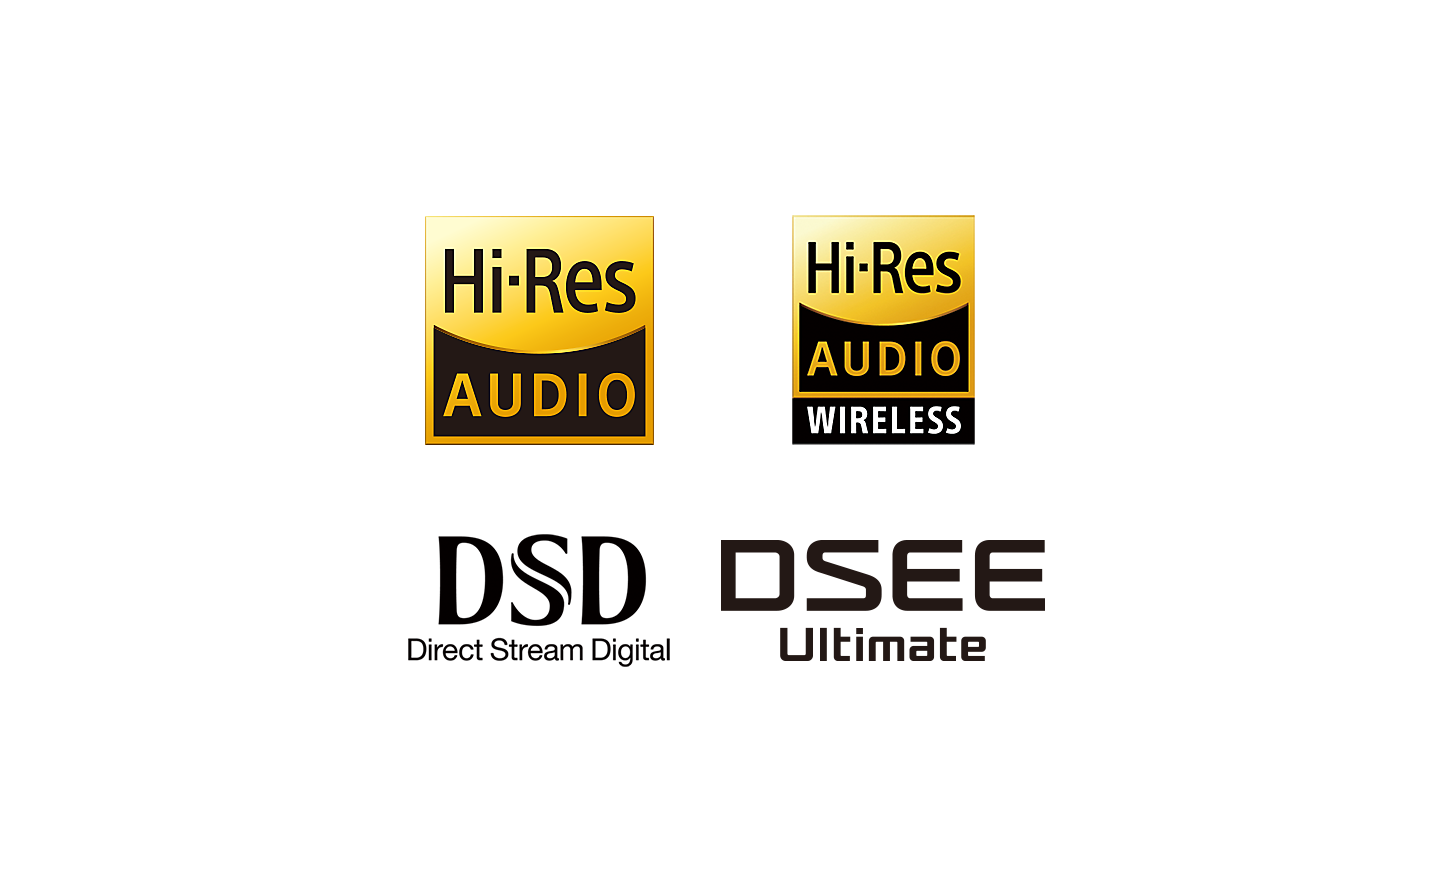 High-Res Audio, High-Res Audio WIRELESS, DSD and DSEE logos.